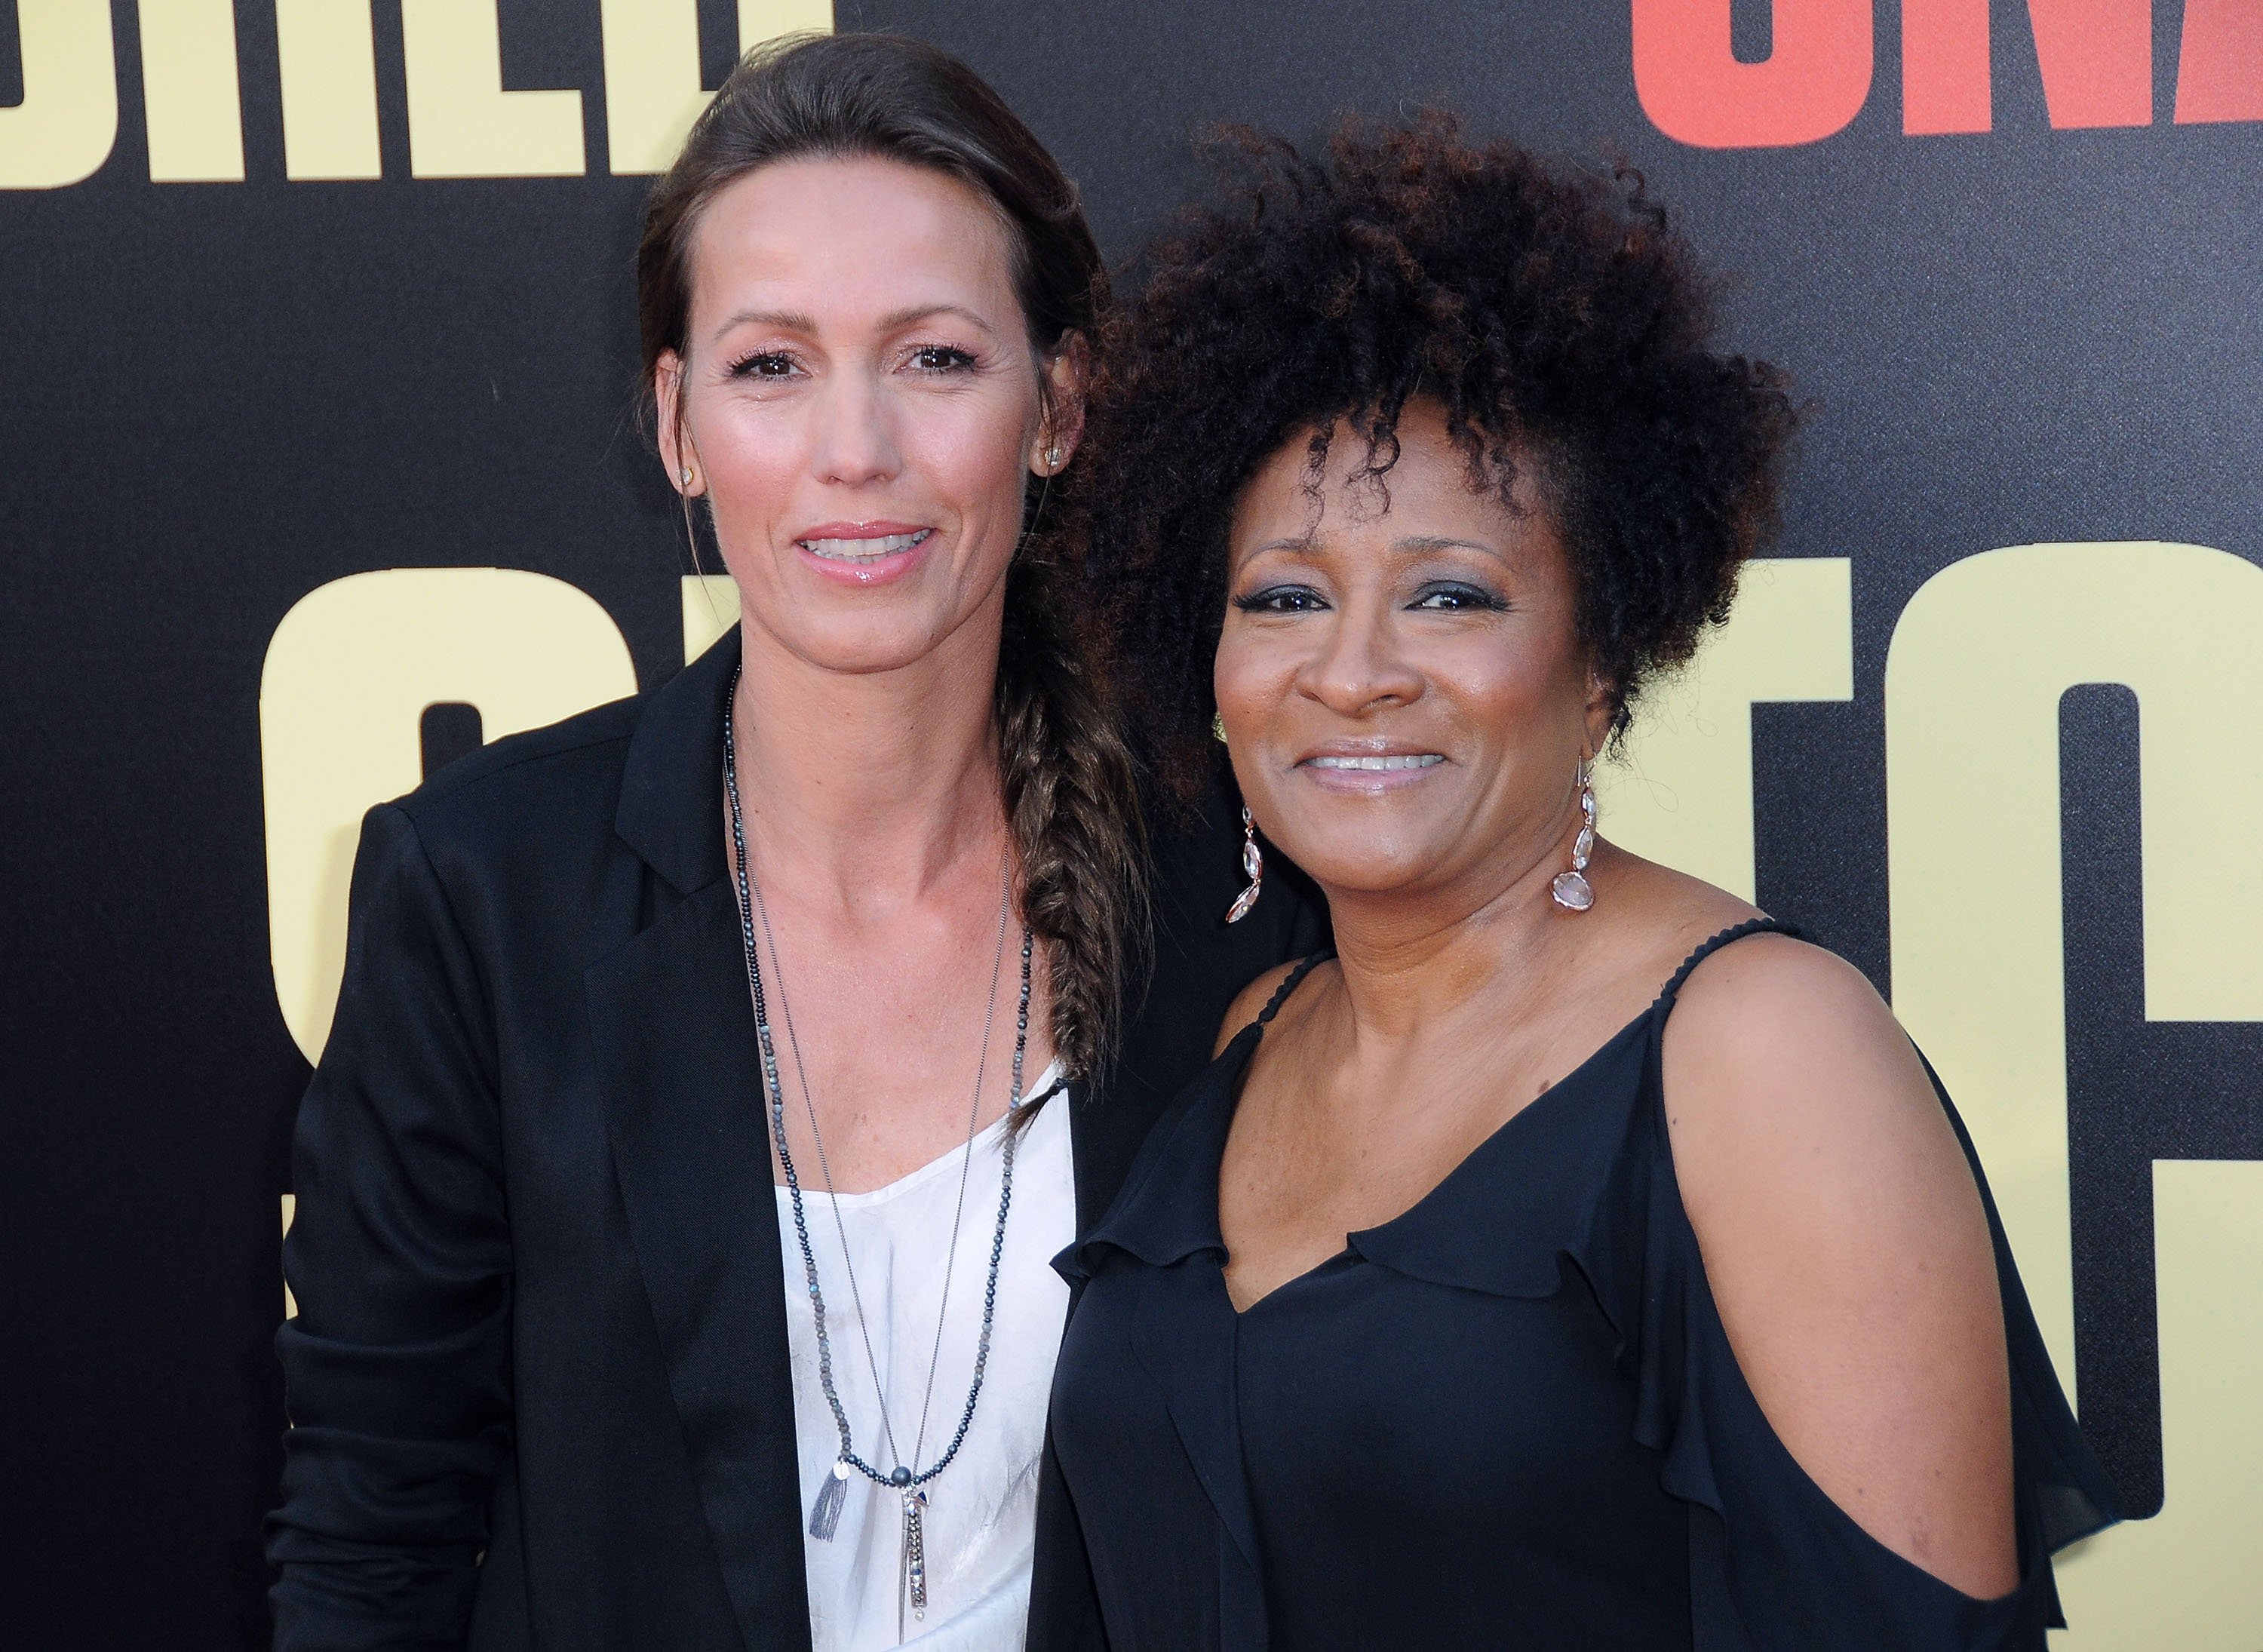 Alex Sykes and comedian Wanda Sykes at Regency Village Theatre on May 10, 2017, in Westwood, California. | Source: Getty Images